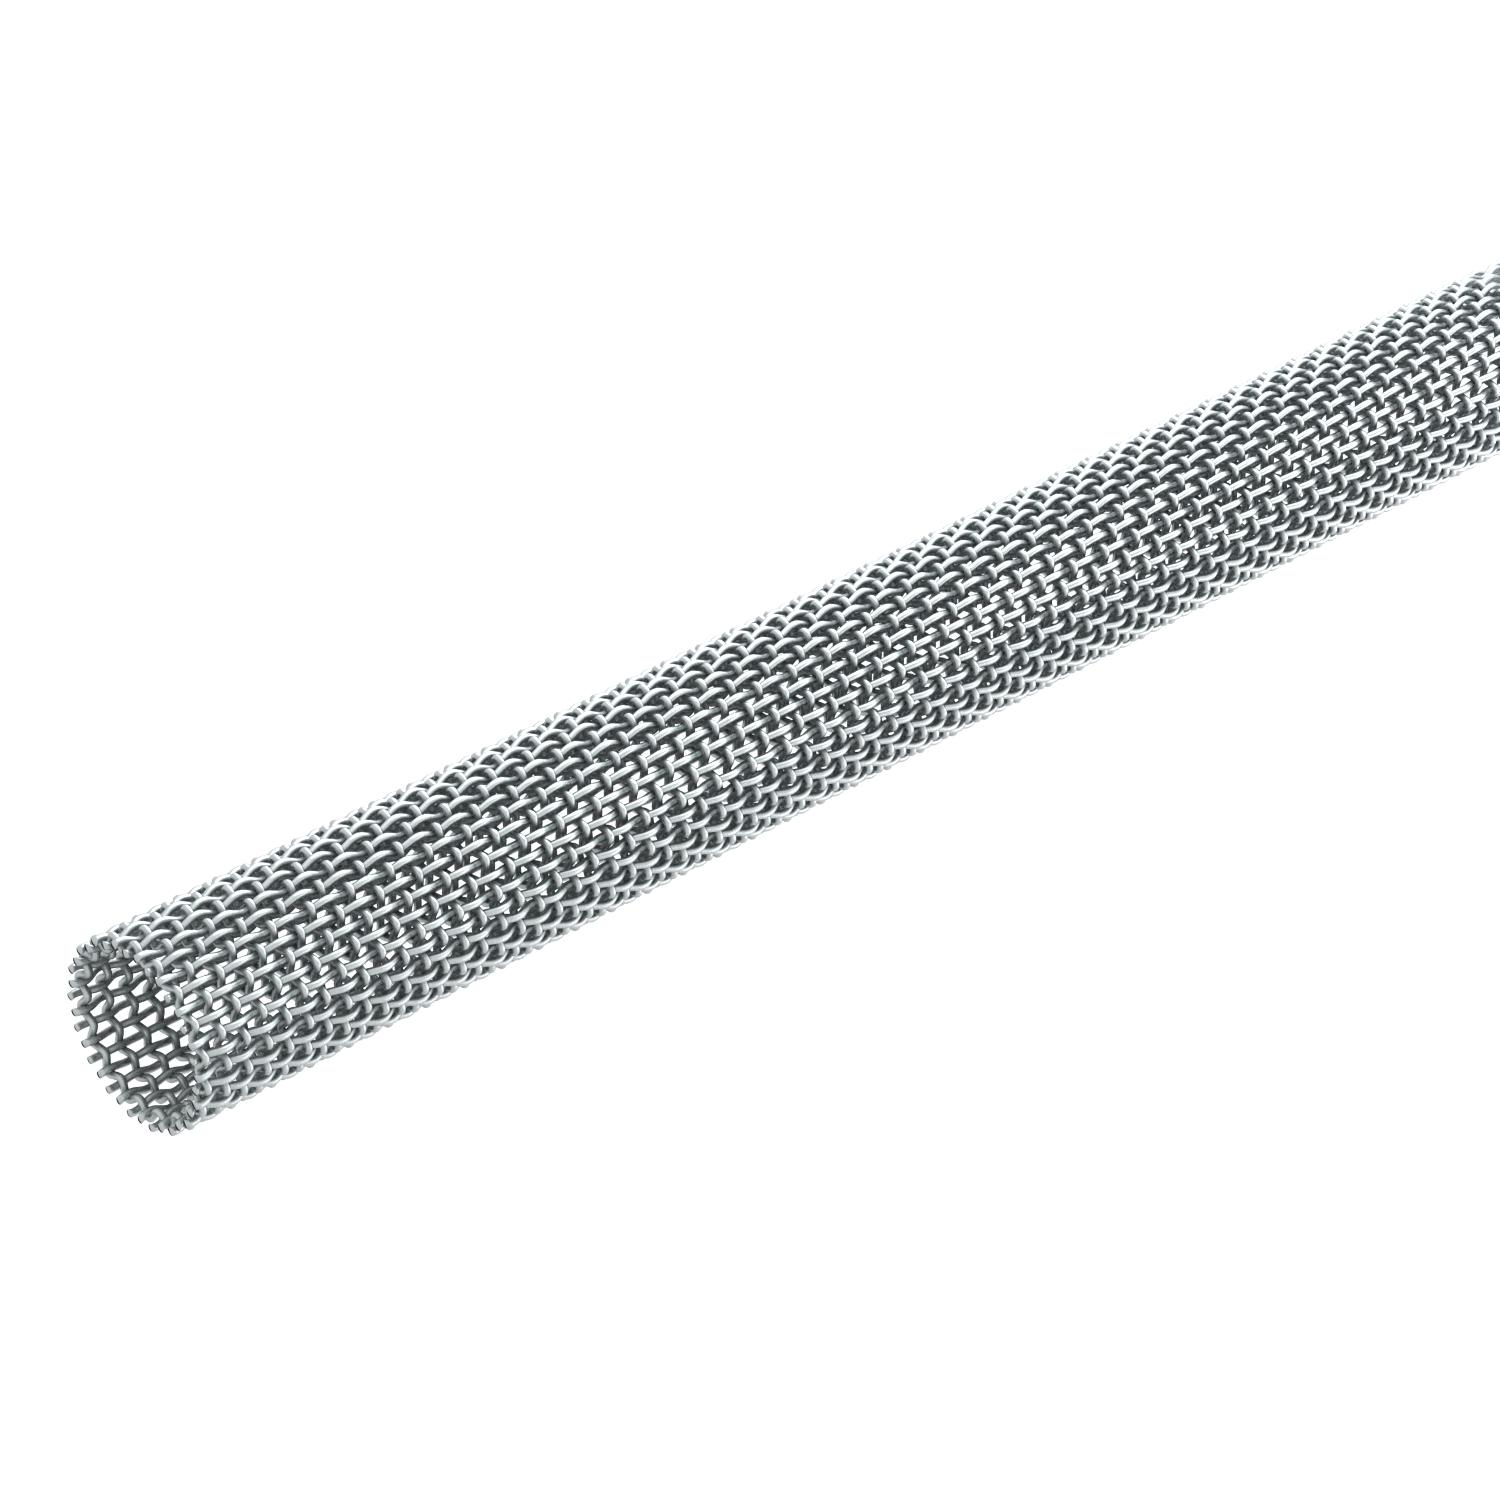 Perforated Stainless Steel Mesh Sleeve Tubing